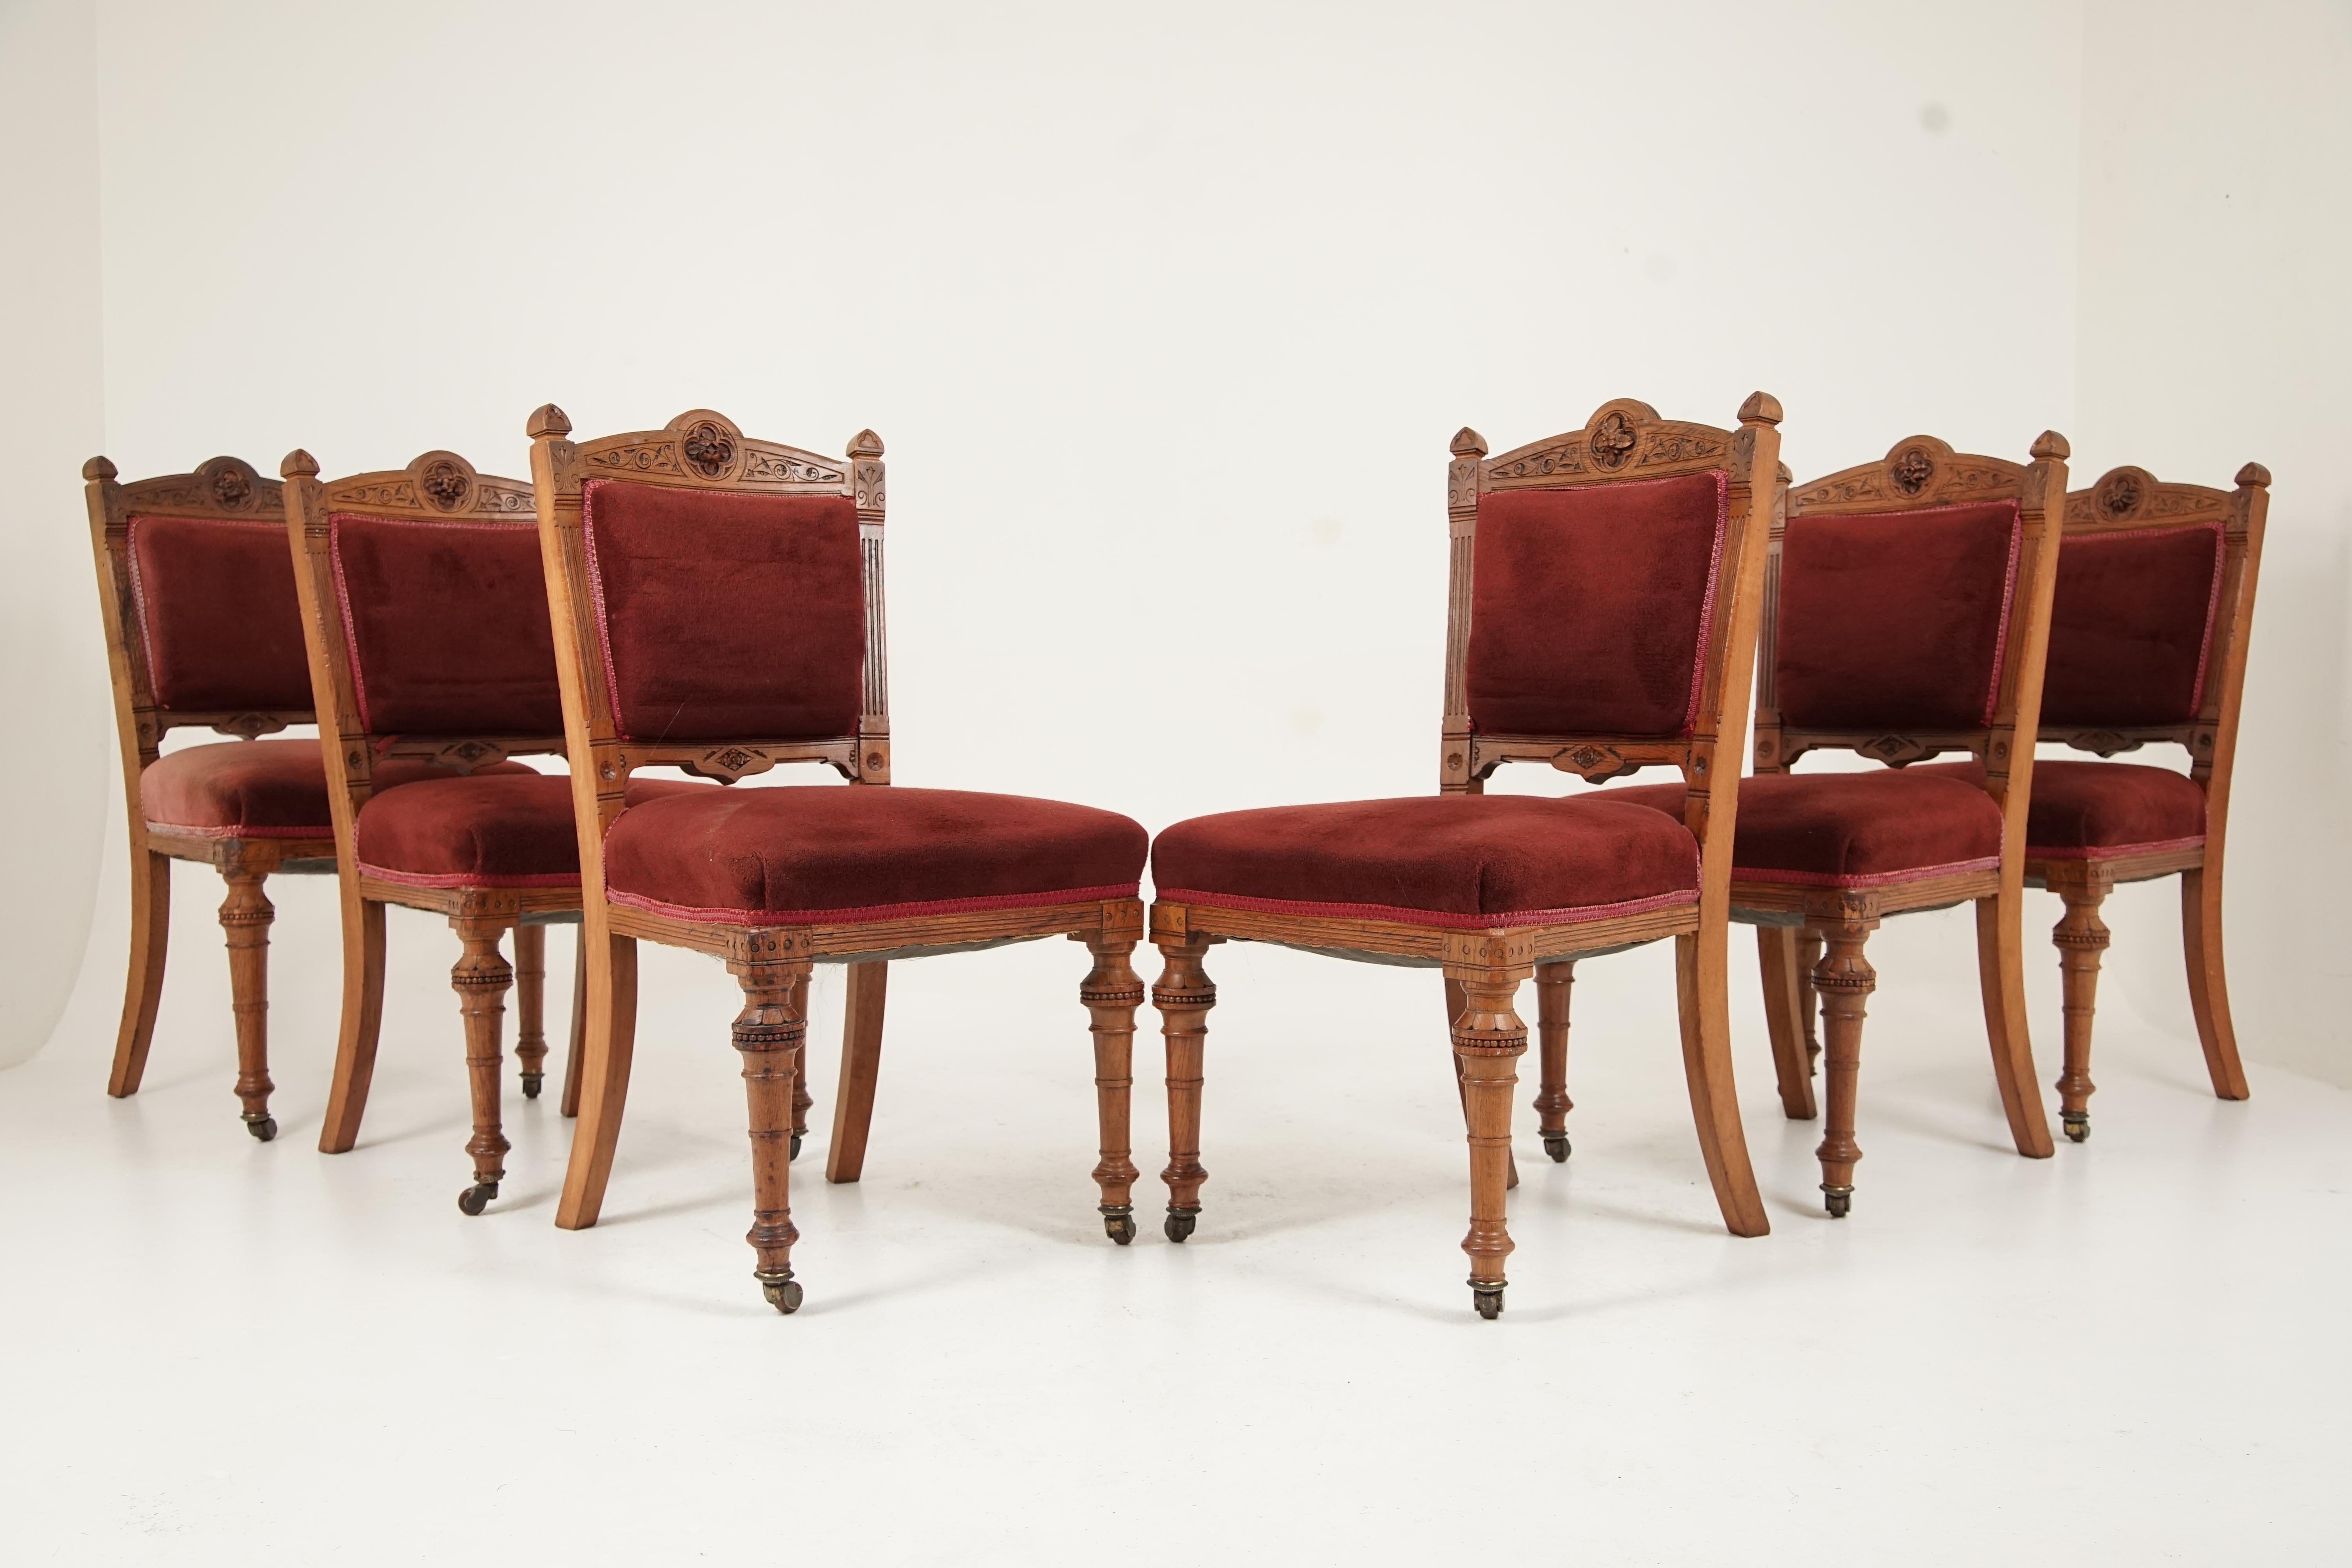 Scottish Set of 6 Victorian Oak Carved Upholstered Dining Chairs, Scotland 1890, B2451